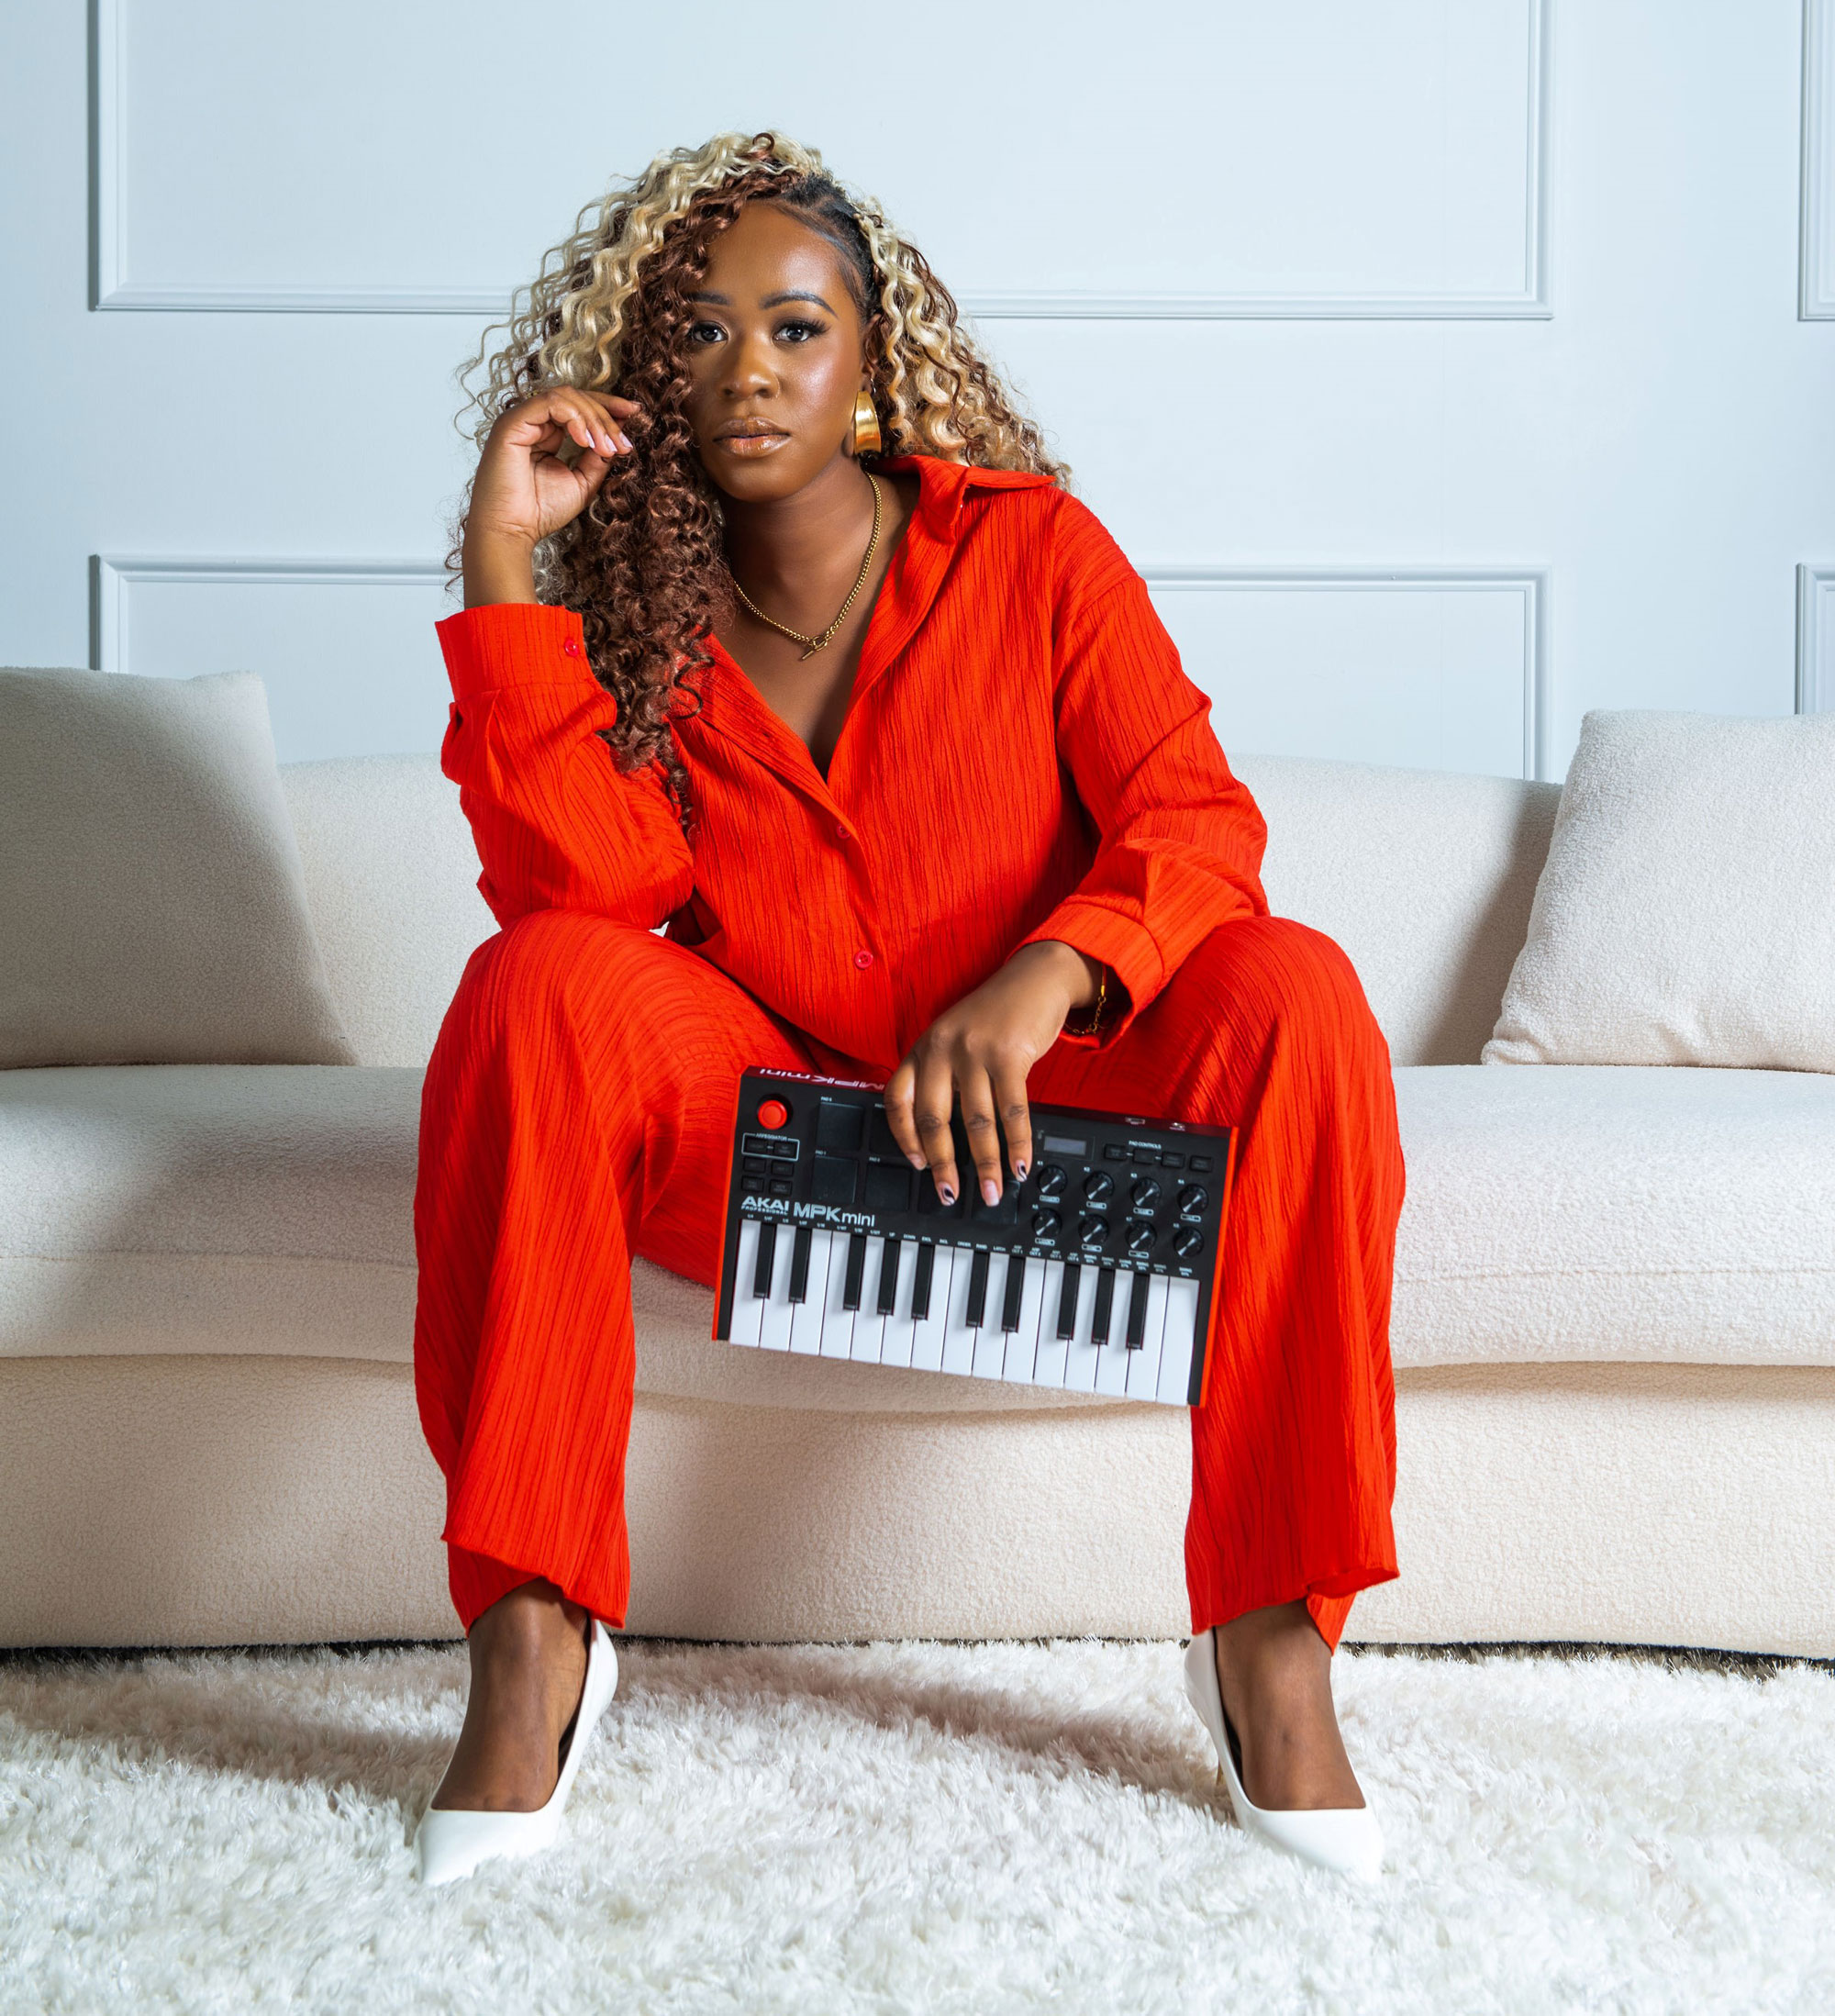 Desarae Dee sitting on a white couch in a red dress suit with white heels on a fluffy white carpet. Desarae is holding a small keyboard in her hands and looking at the camera . She has blond and brown curly hair and is wearing wide gold earrings. 